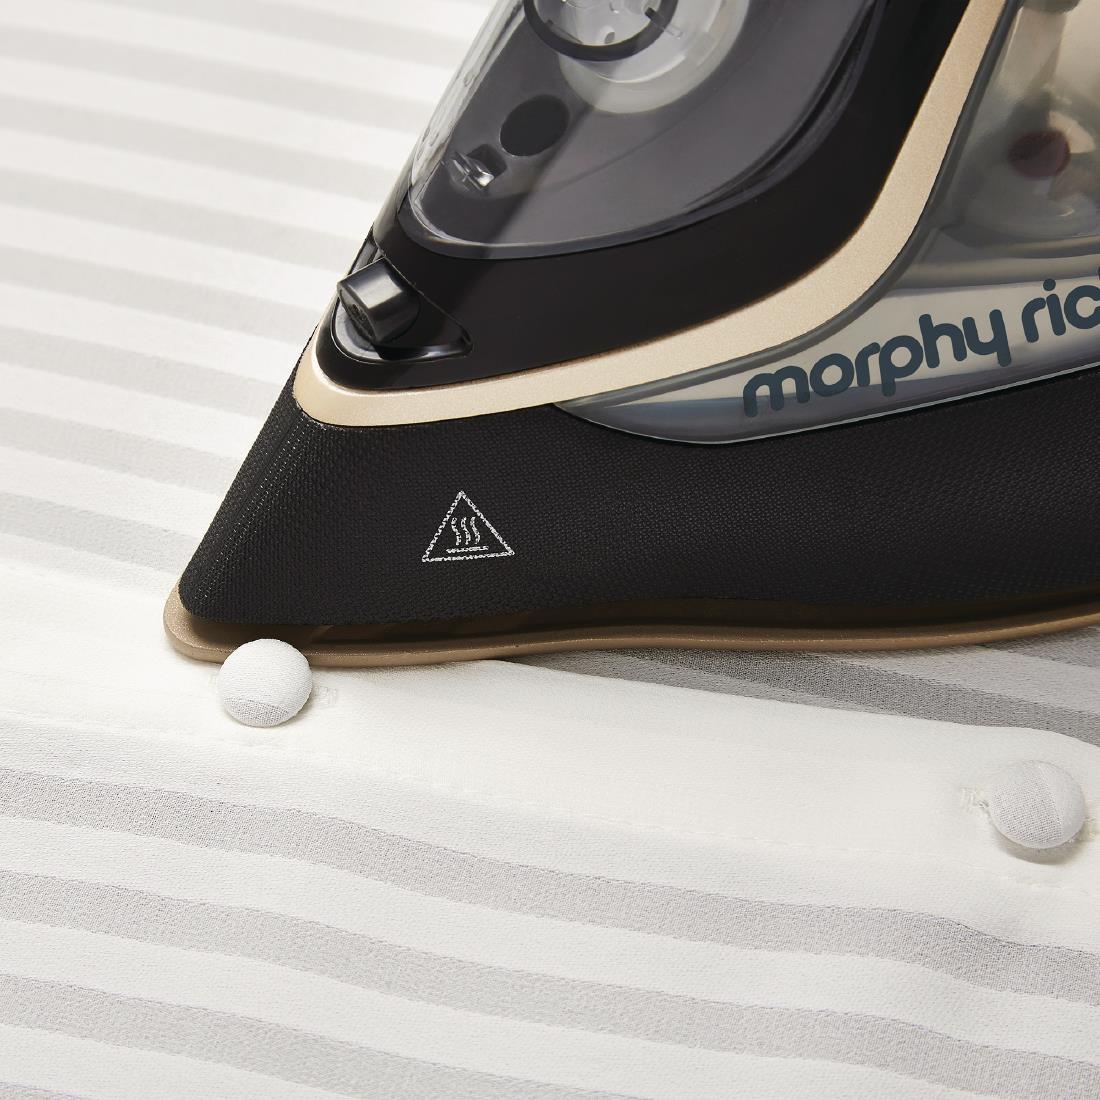 Morphy Richards Crystal Clear Steam Iron 300302 - FP912  - 3